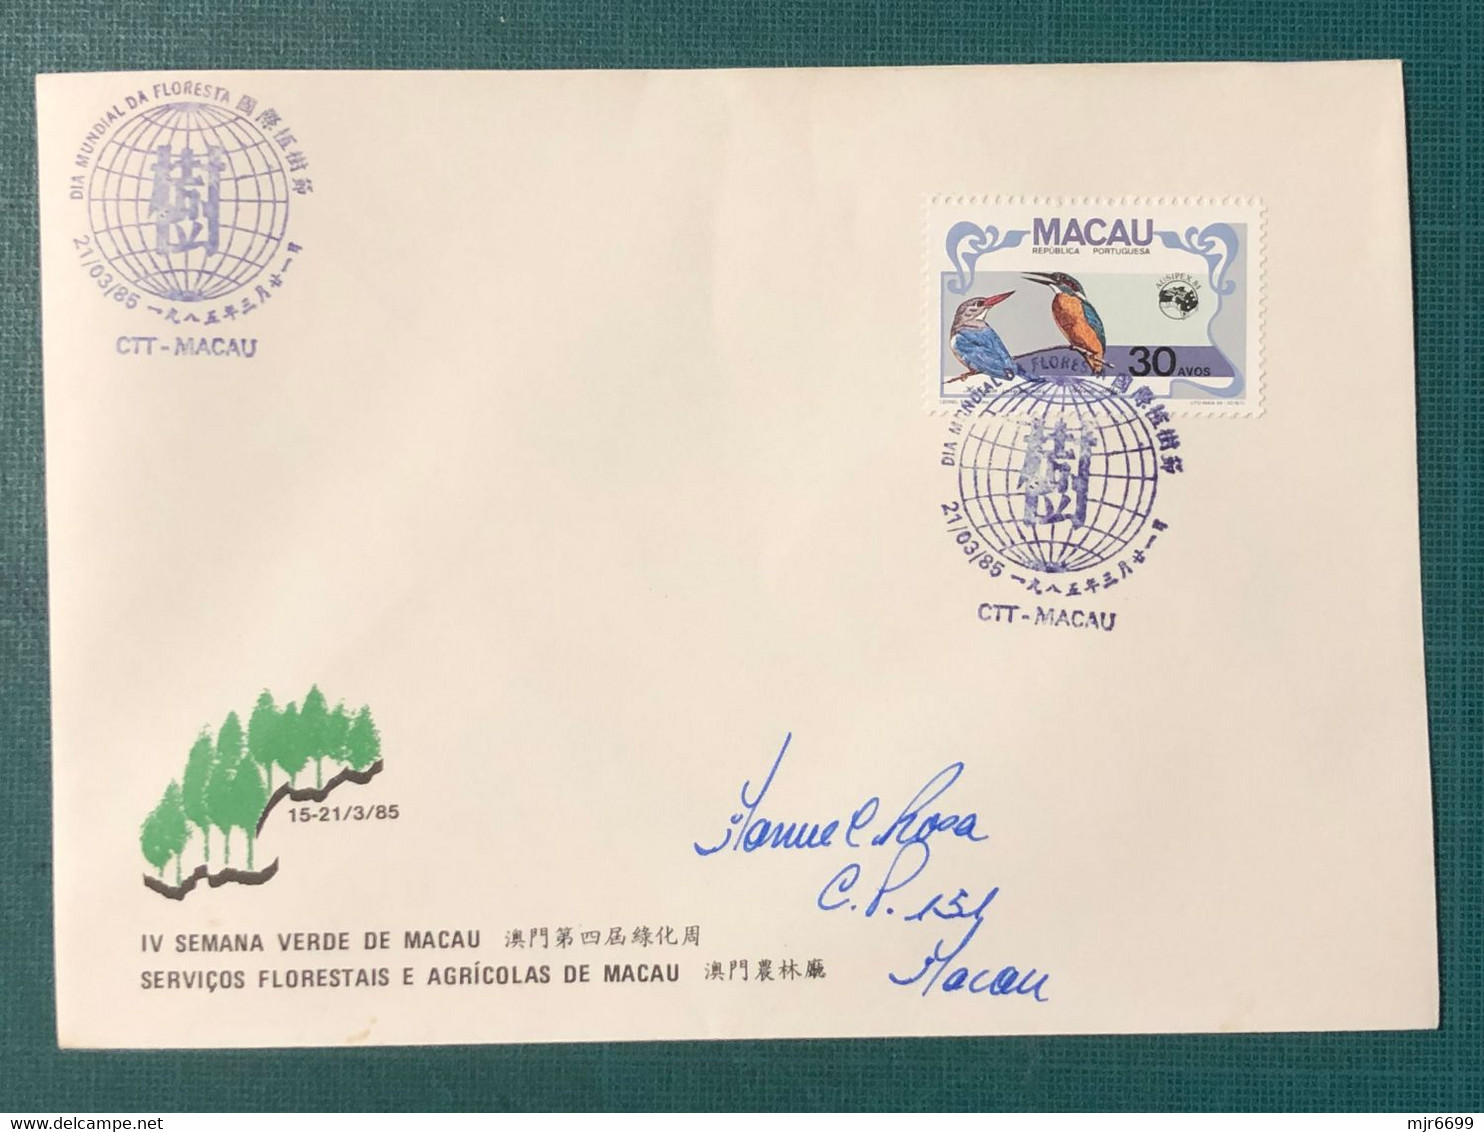 MACAU 1985 GREEN WEEK SPECIAL COVER WITH BIRDS STAMP - FDC